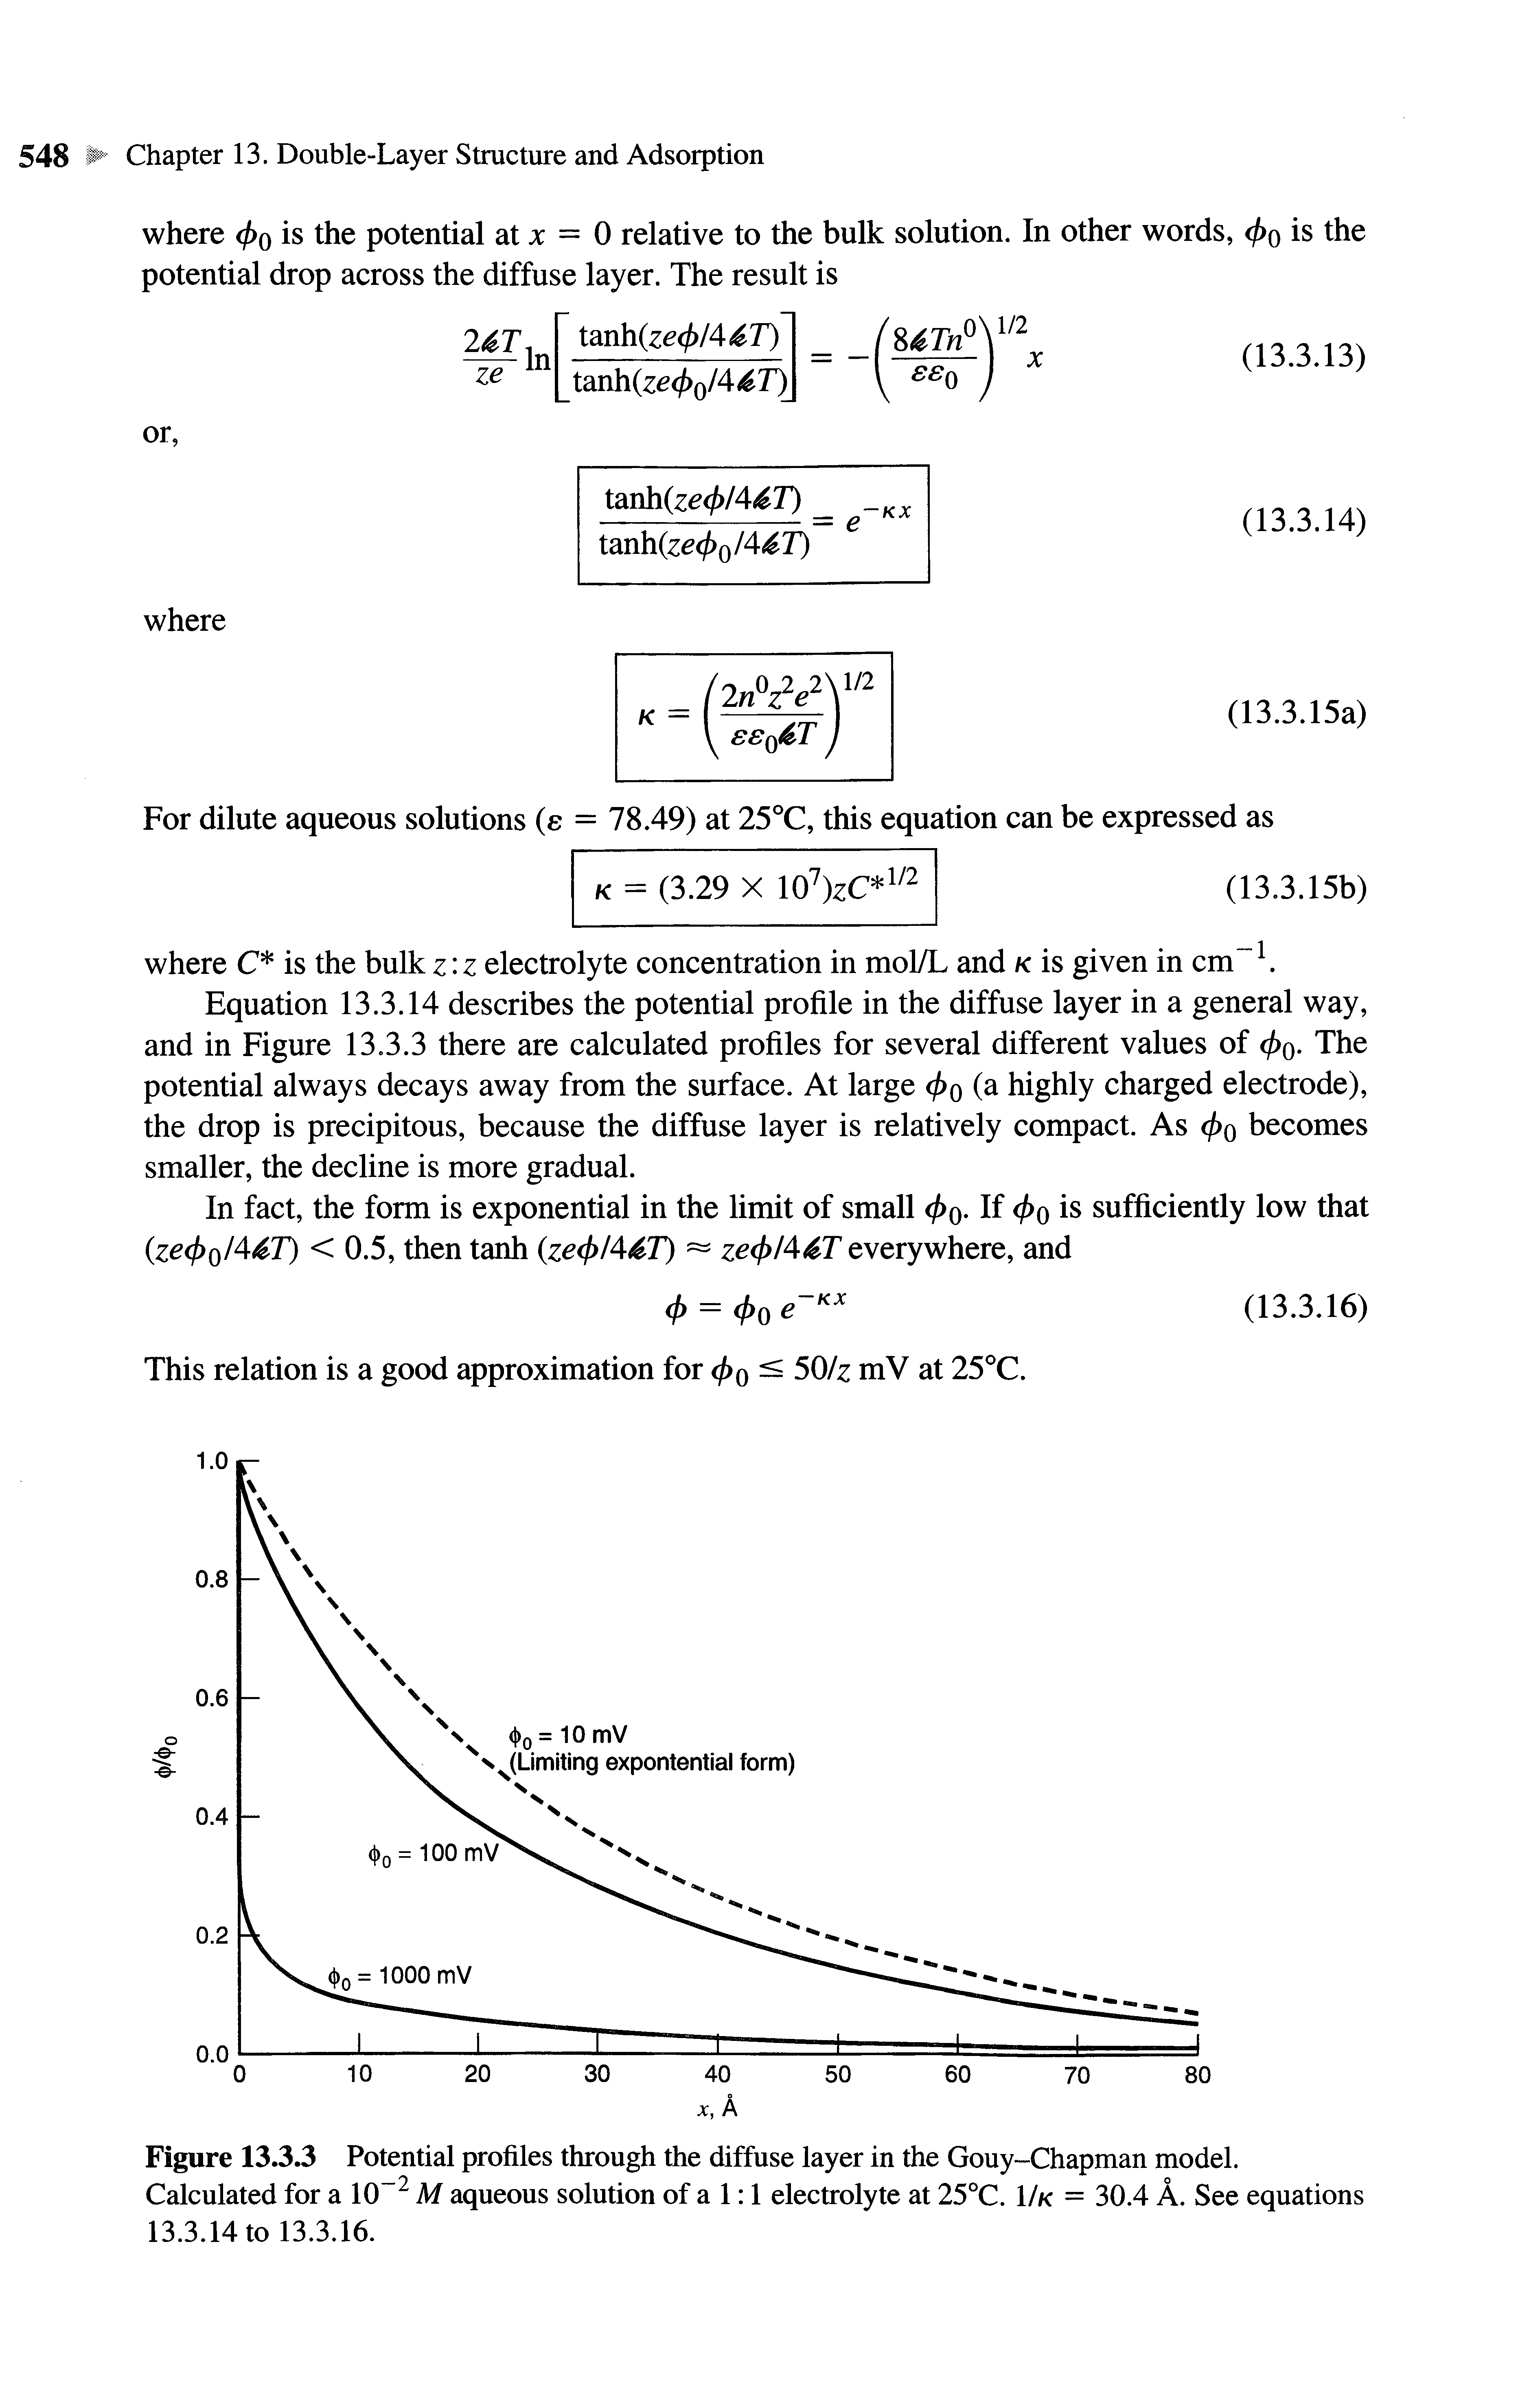 Figure 13.3.3 Potential profiles through the diffuse layer in the Gouy-Chapman model. Calculated for a 10 M aqueous solution of a 1 1 electrolyte at 25°C. 1/k = 30.4 A. See equations 13.3.14 to 13.3.16.